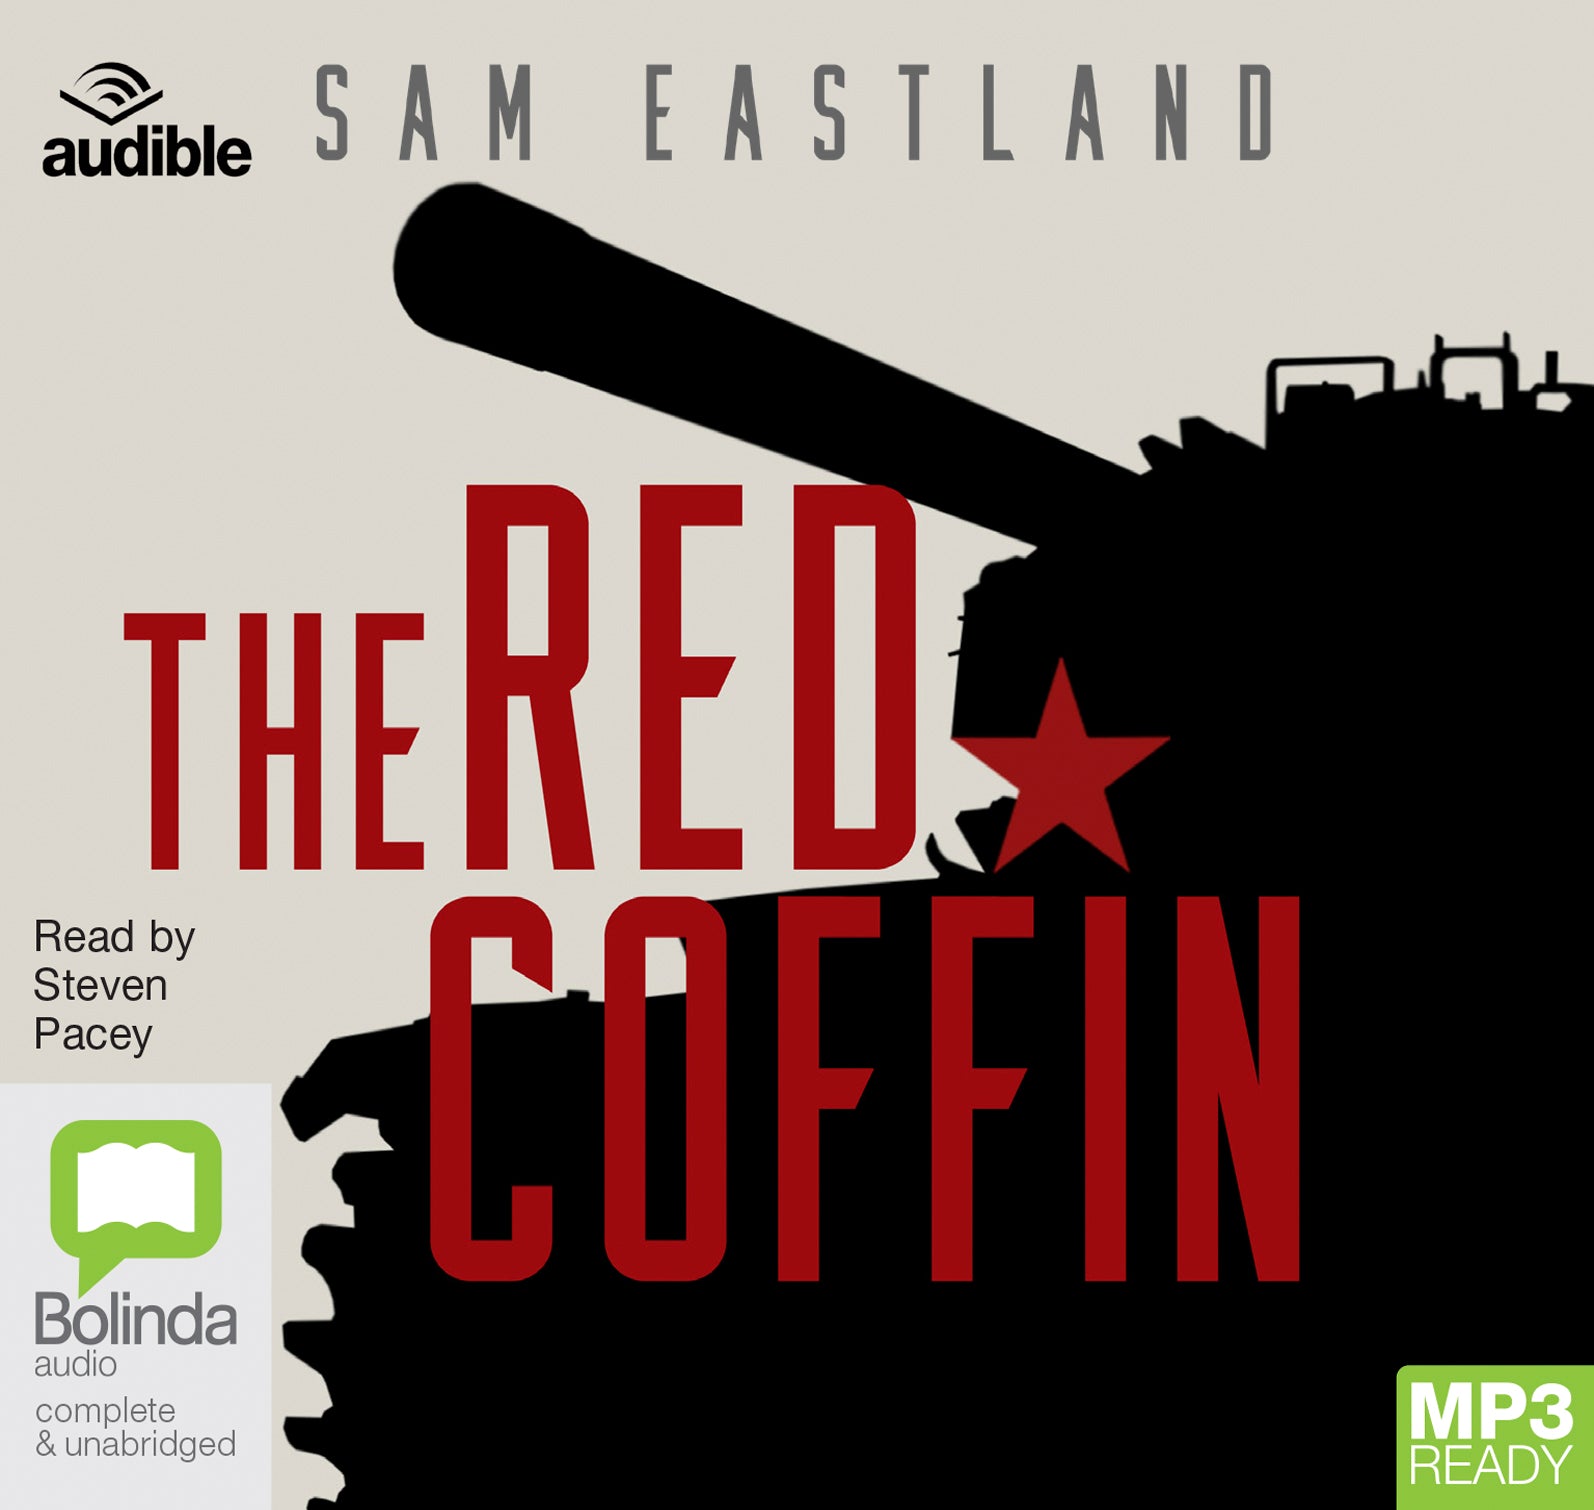 The Red Coffin  - Unbridged Audio Book on MP3